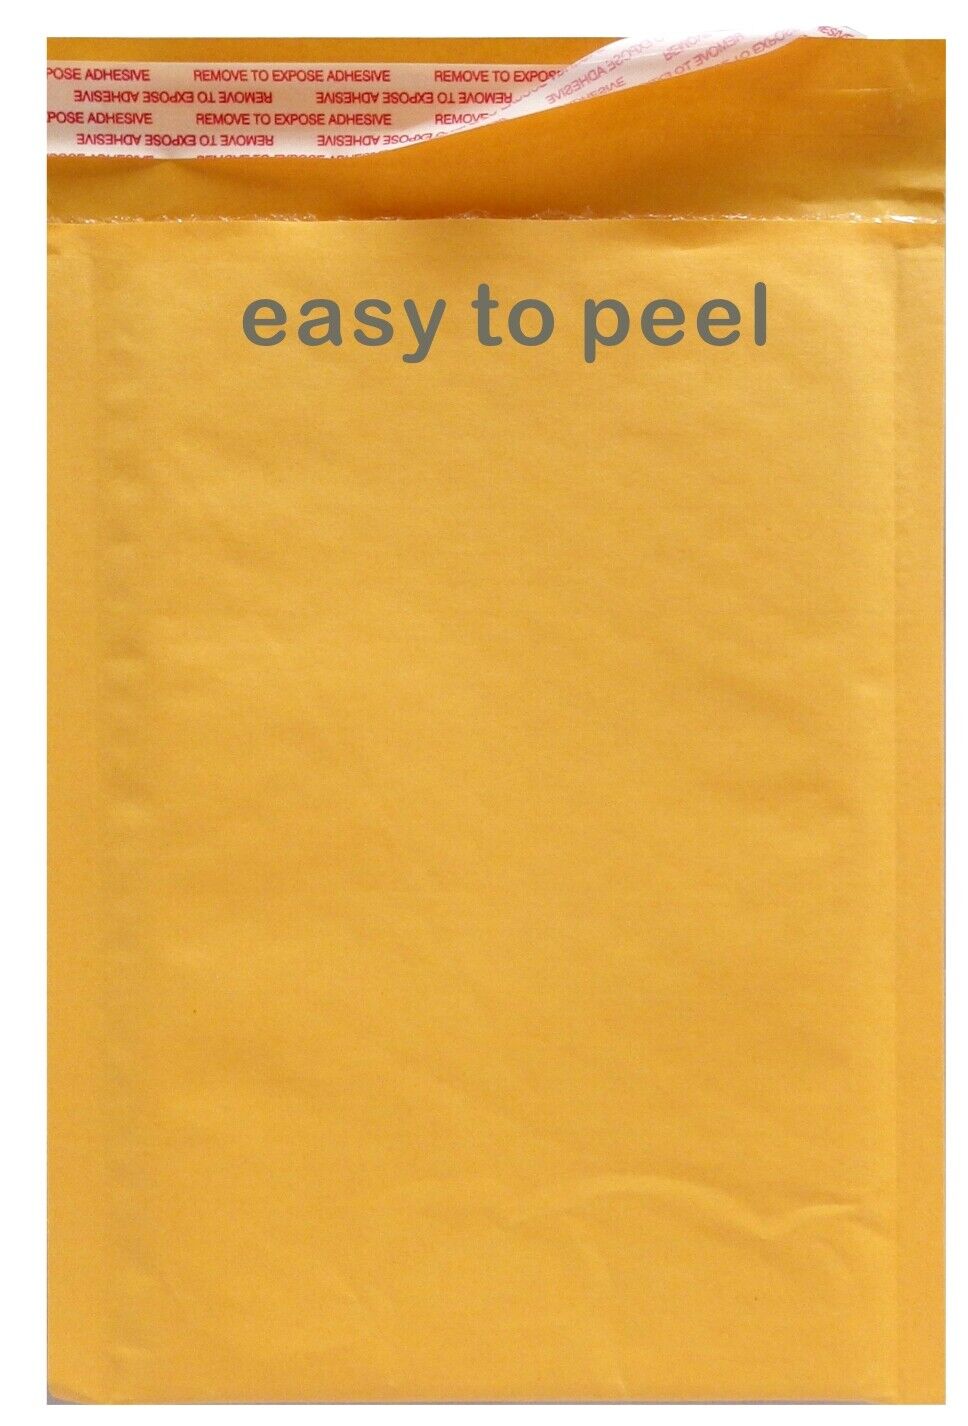 Poly2000pcs#000Kraft Bubble Envelopes Mailers(Inner 4x7)(Economy Quality-Thinner